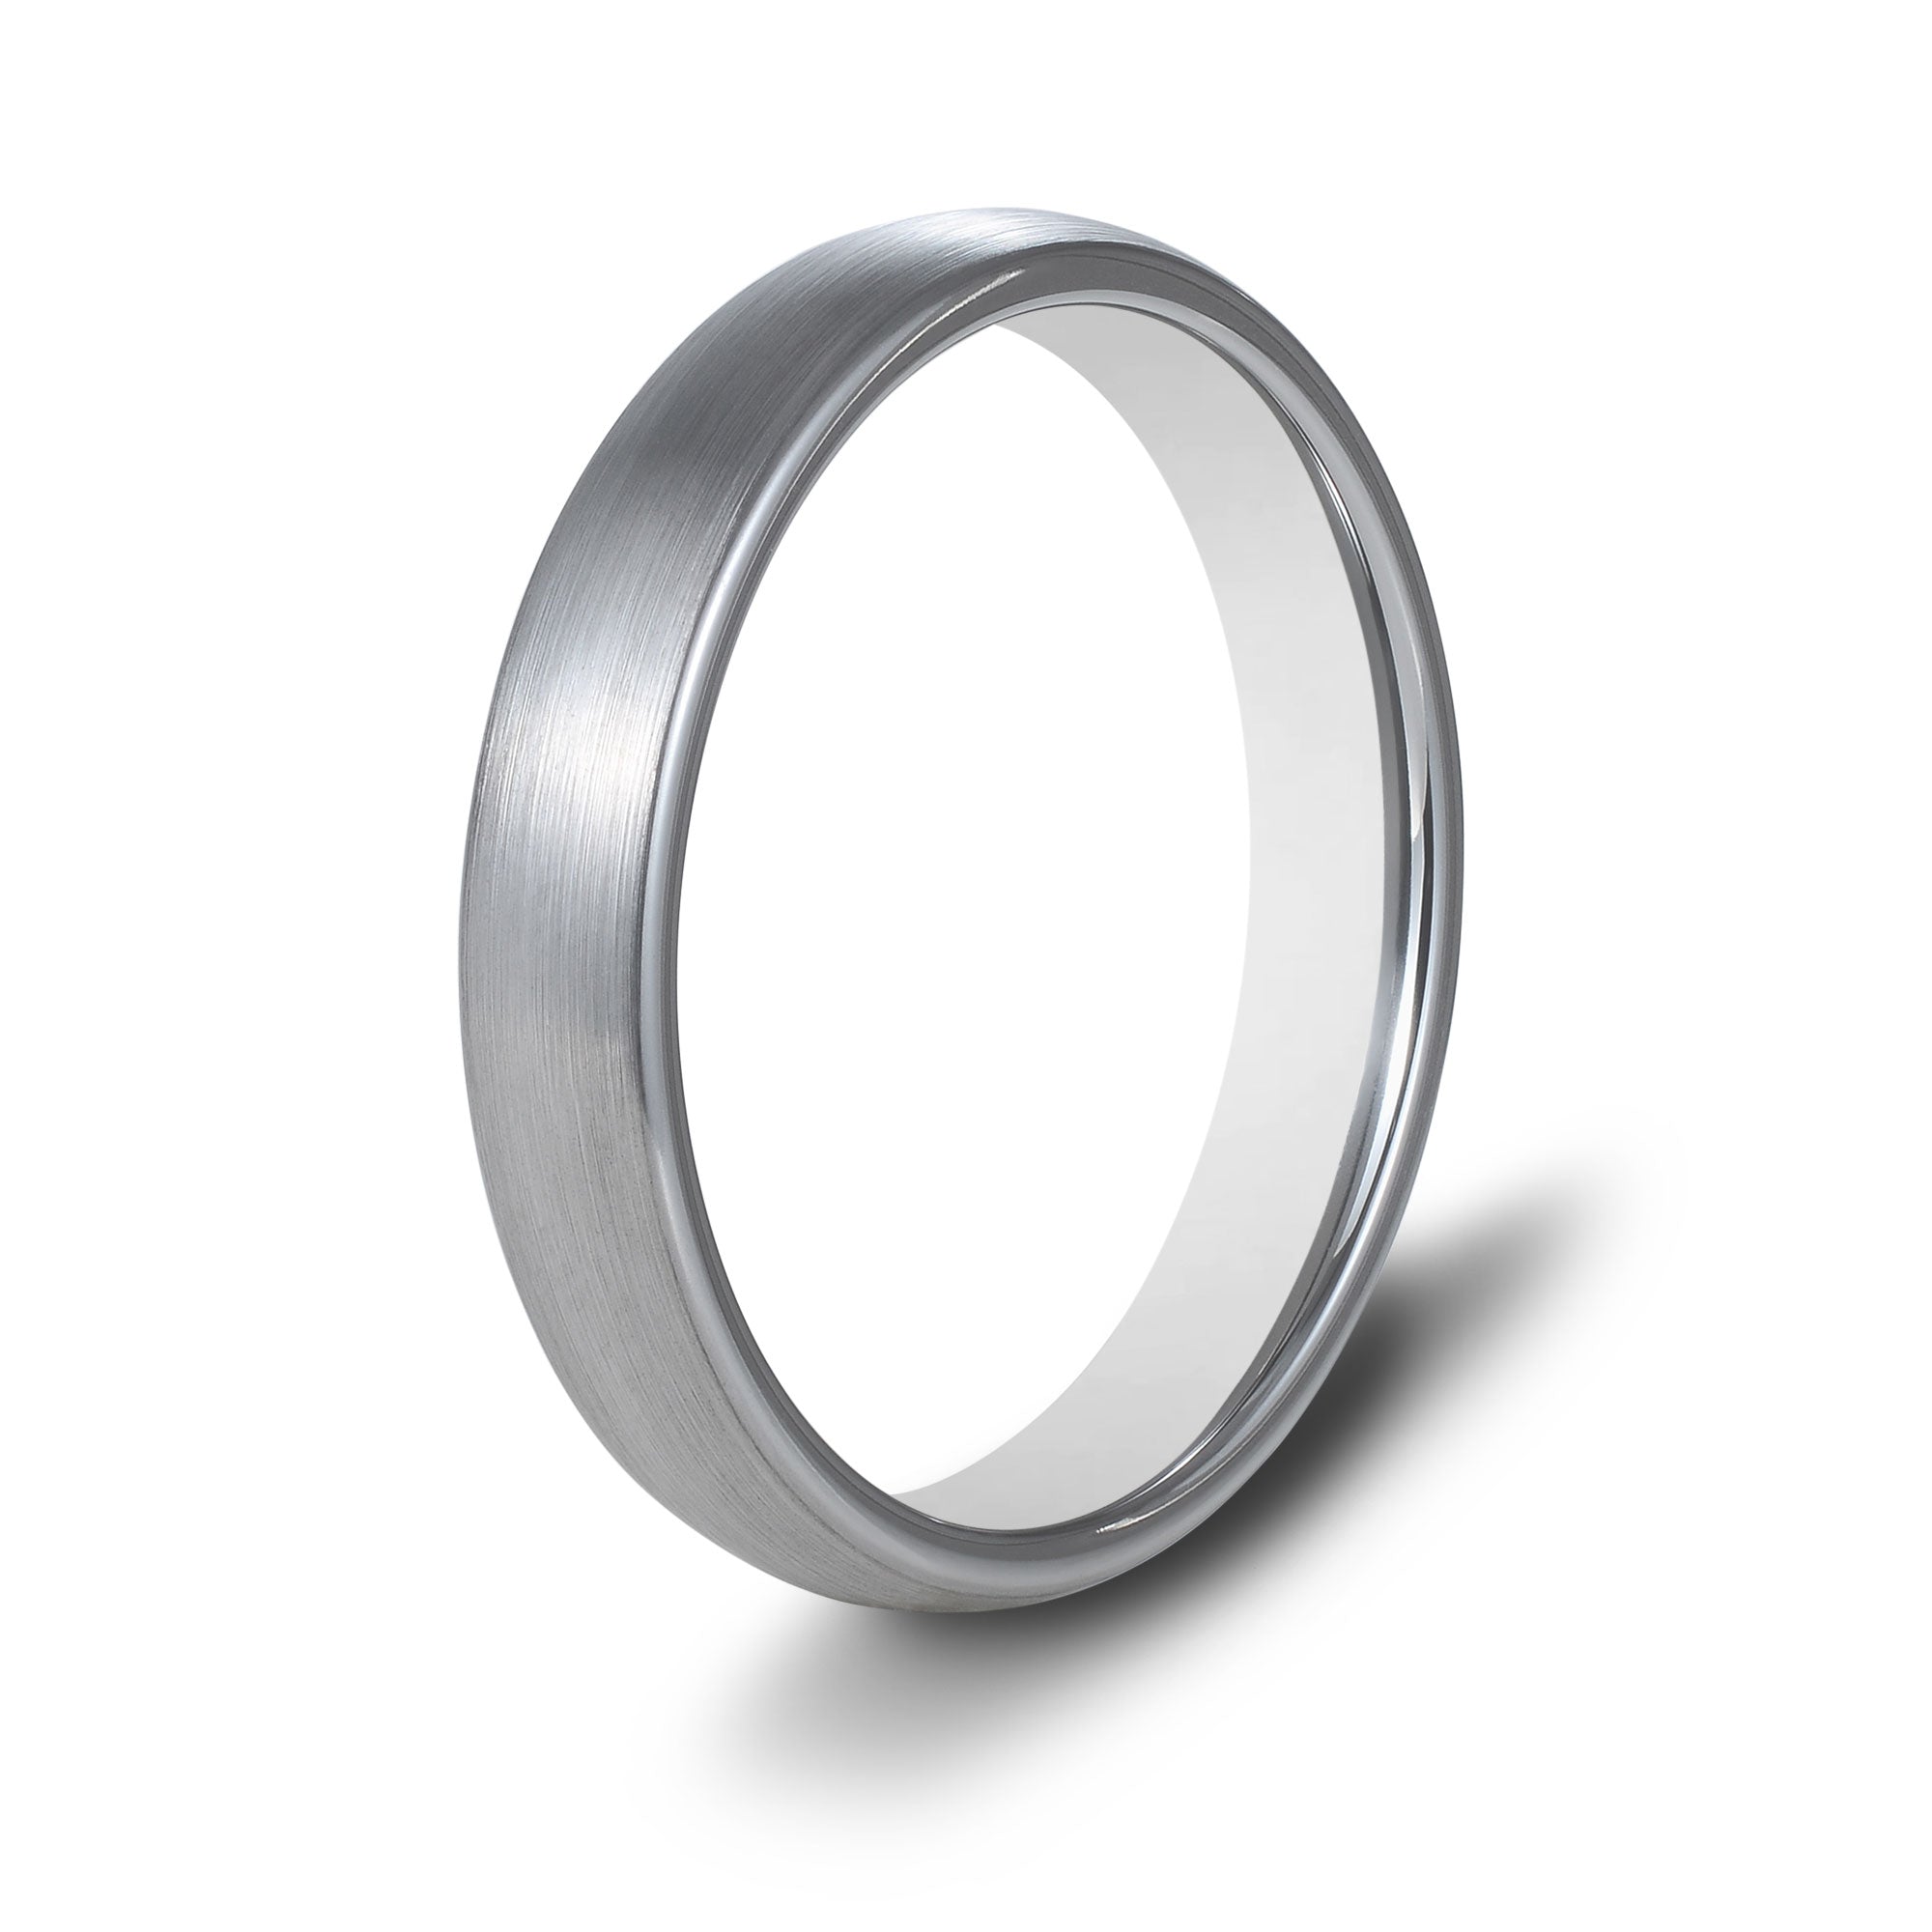 The Hero - Silver 4mm Brushed Tungsten Ring